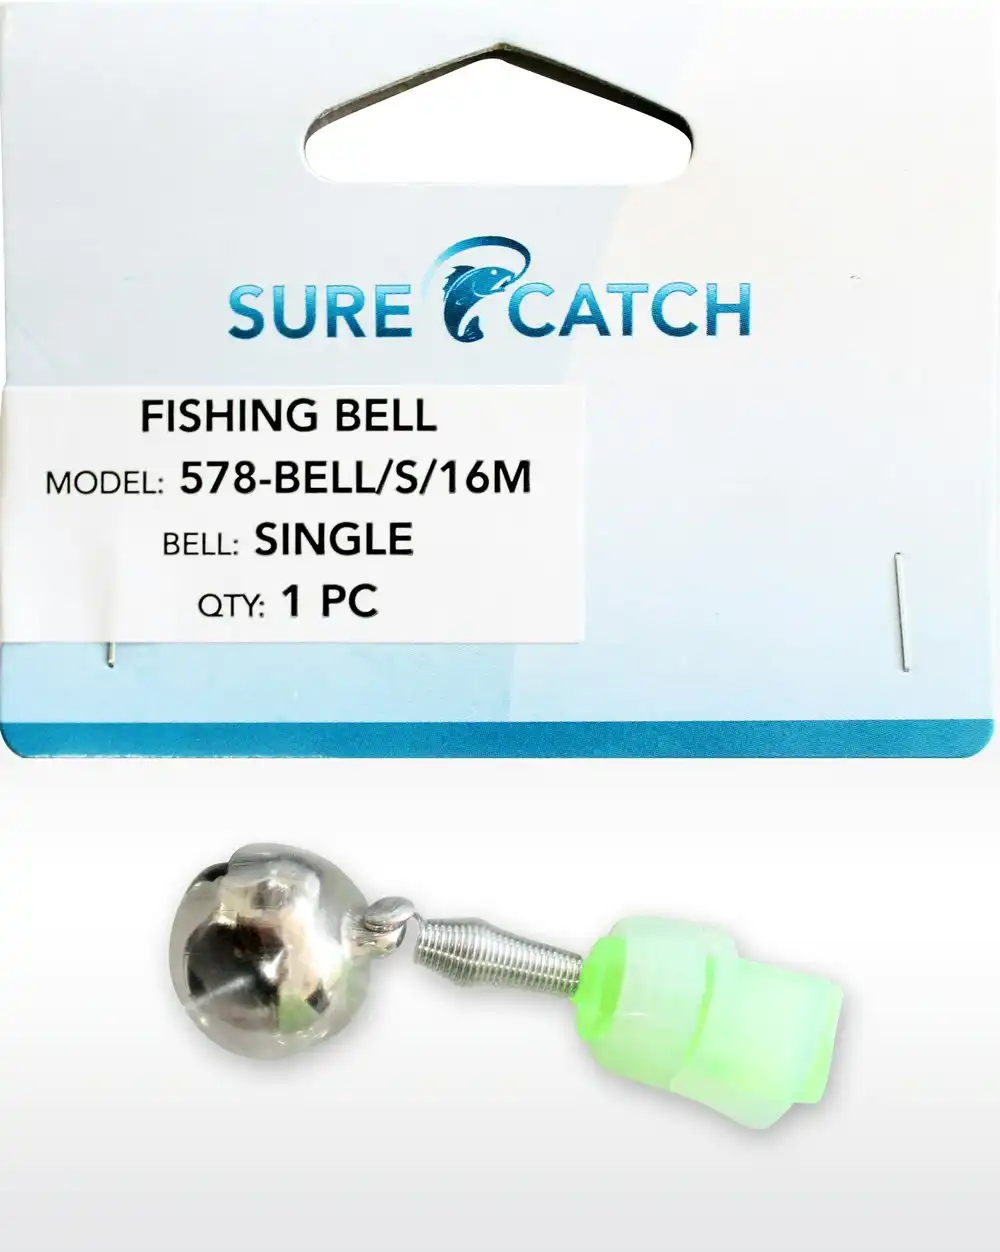 Surecatch Single Fishing Rod Bell with Luminous Attachment For Night Use